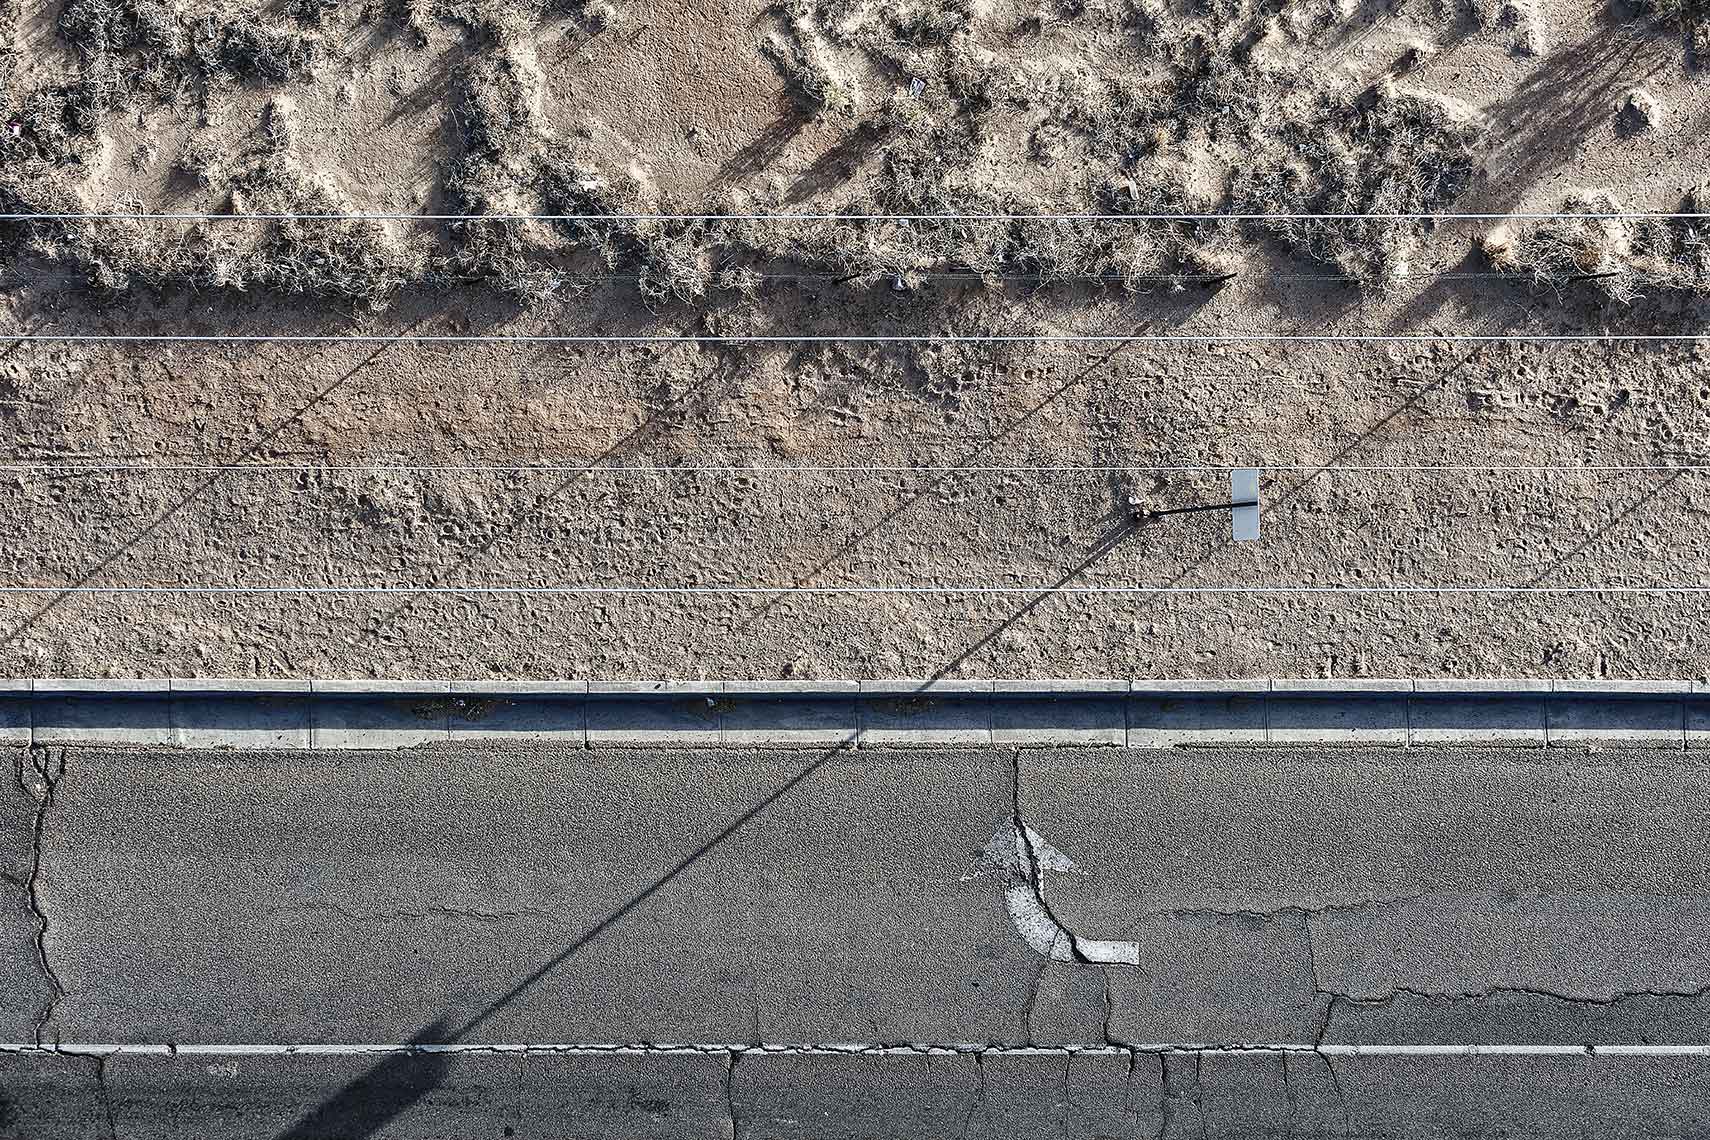 Zoe Wetherall / Aerial Landscape / Shadows